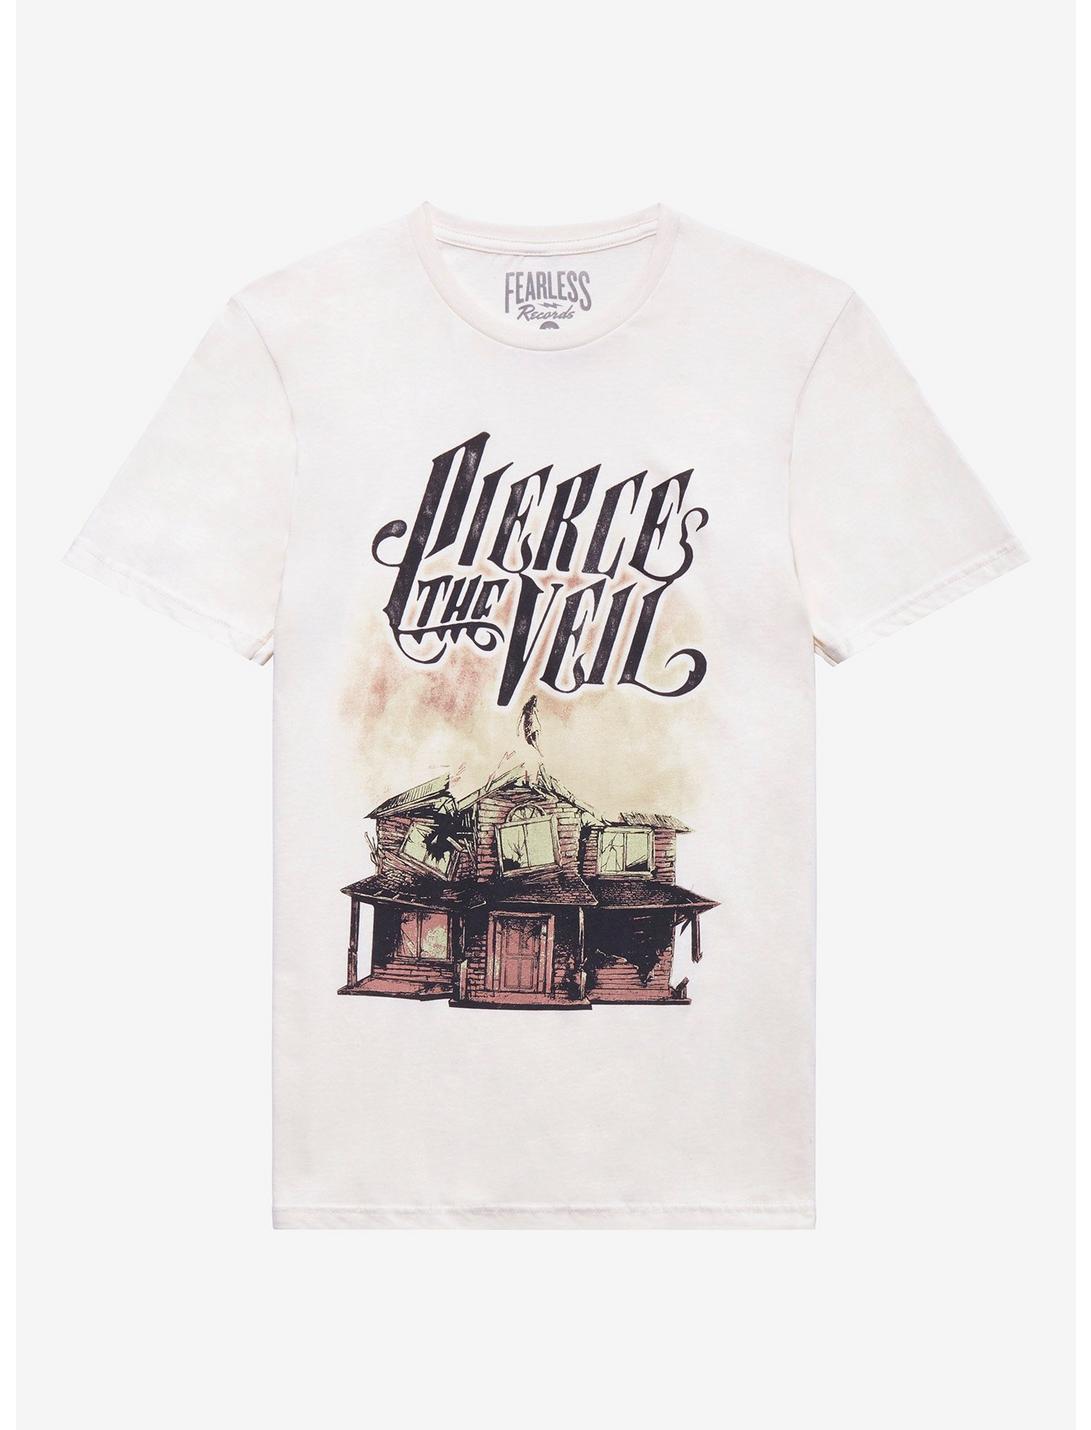 Pierce The Veil Collide With The Sky Boyfriend Fit Girls T-Shirt, NATURAL, hi-res